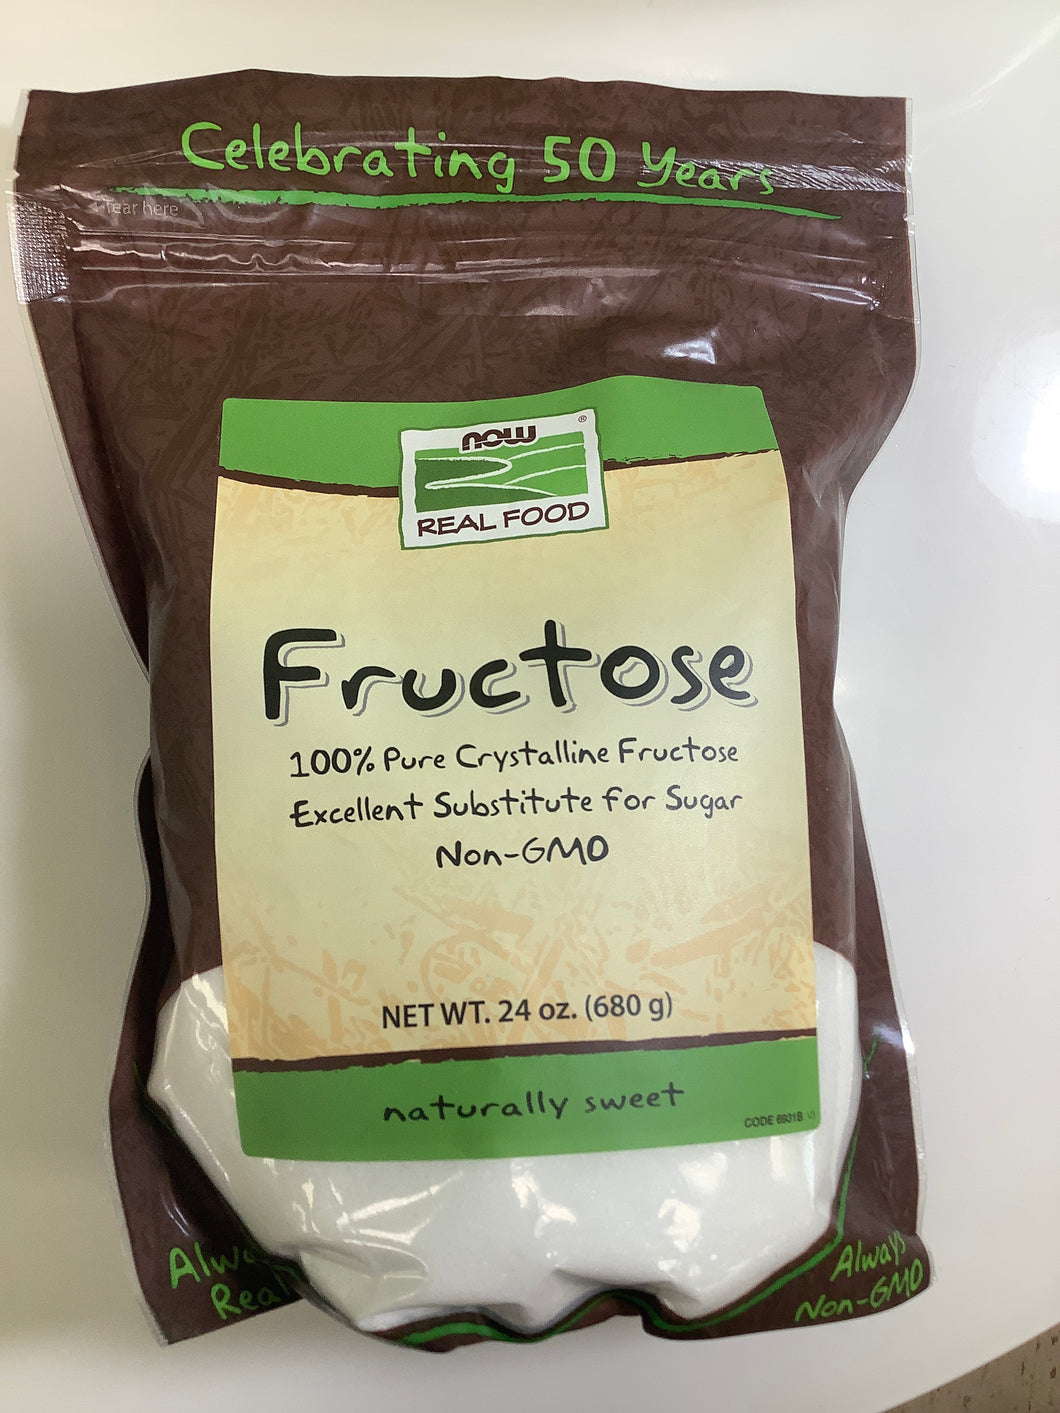 Now Real Food Fructose